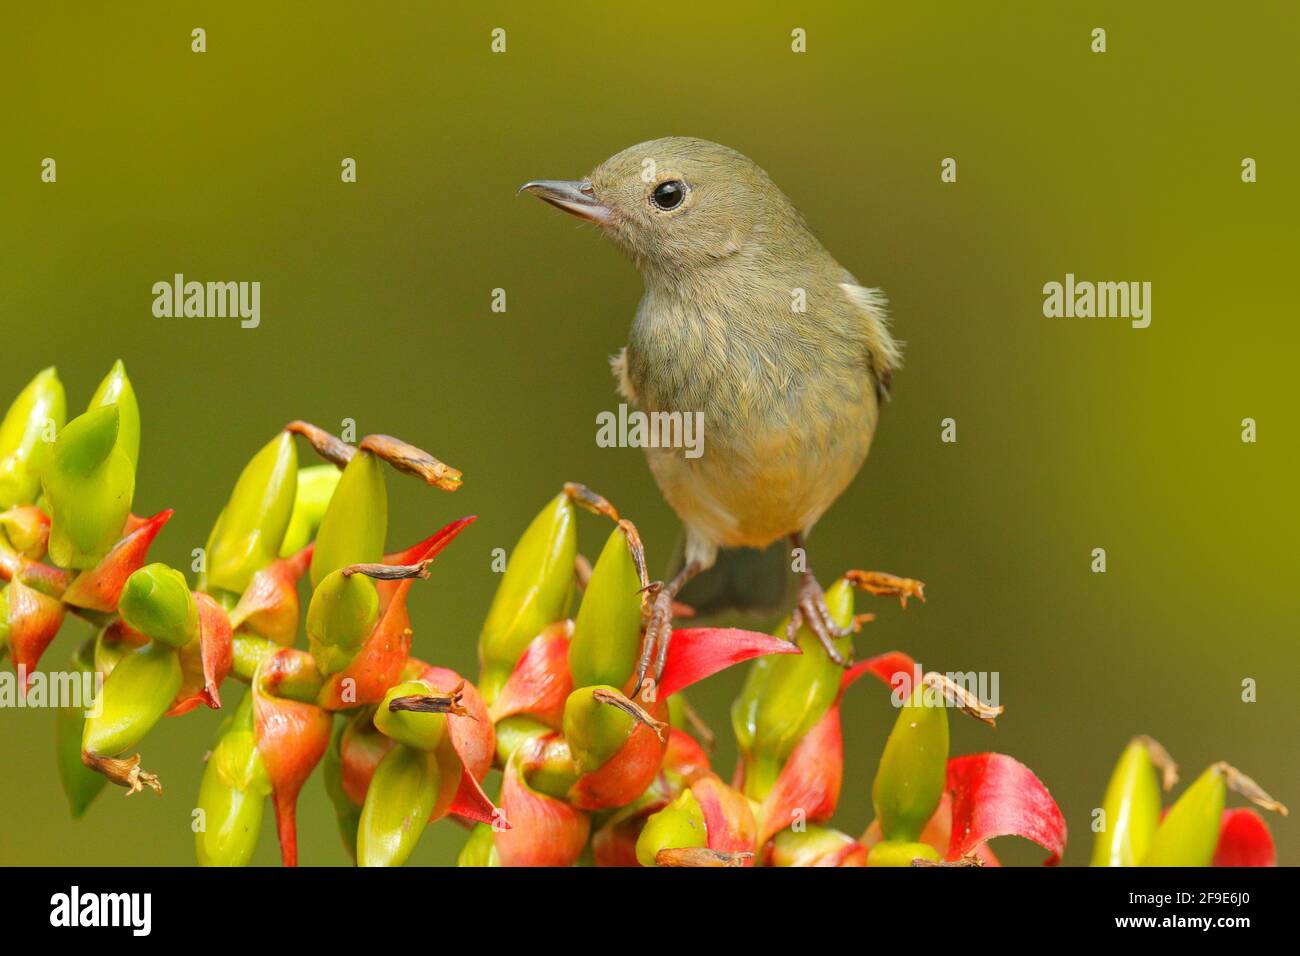 Glossy Flowerpiercer, Diglossa lafresnayii, female, bird with curved bill sitting on the orange red flower, nature habitat, exotic animal from Costa R Stock Photo